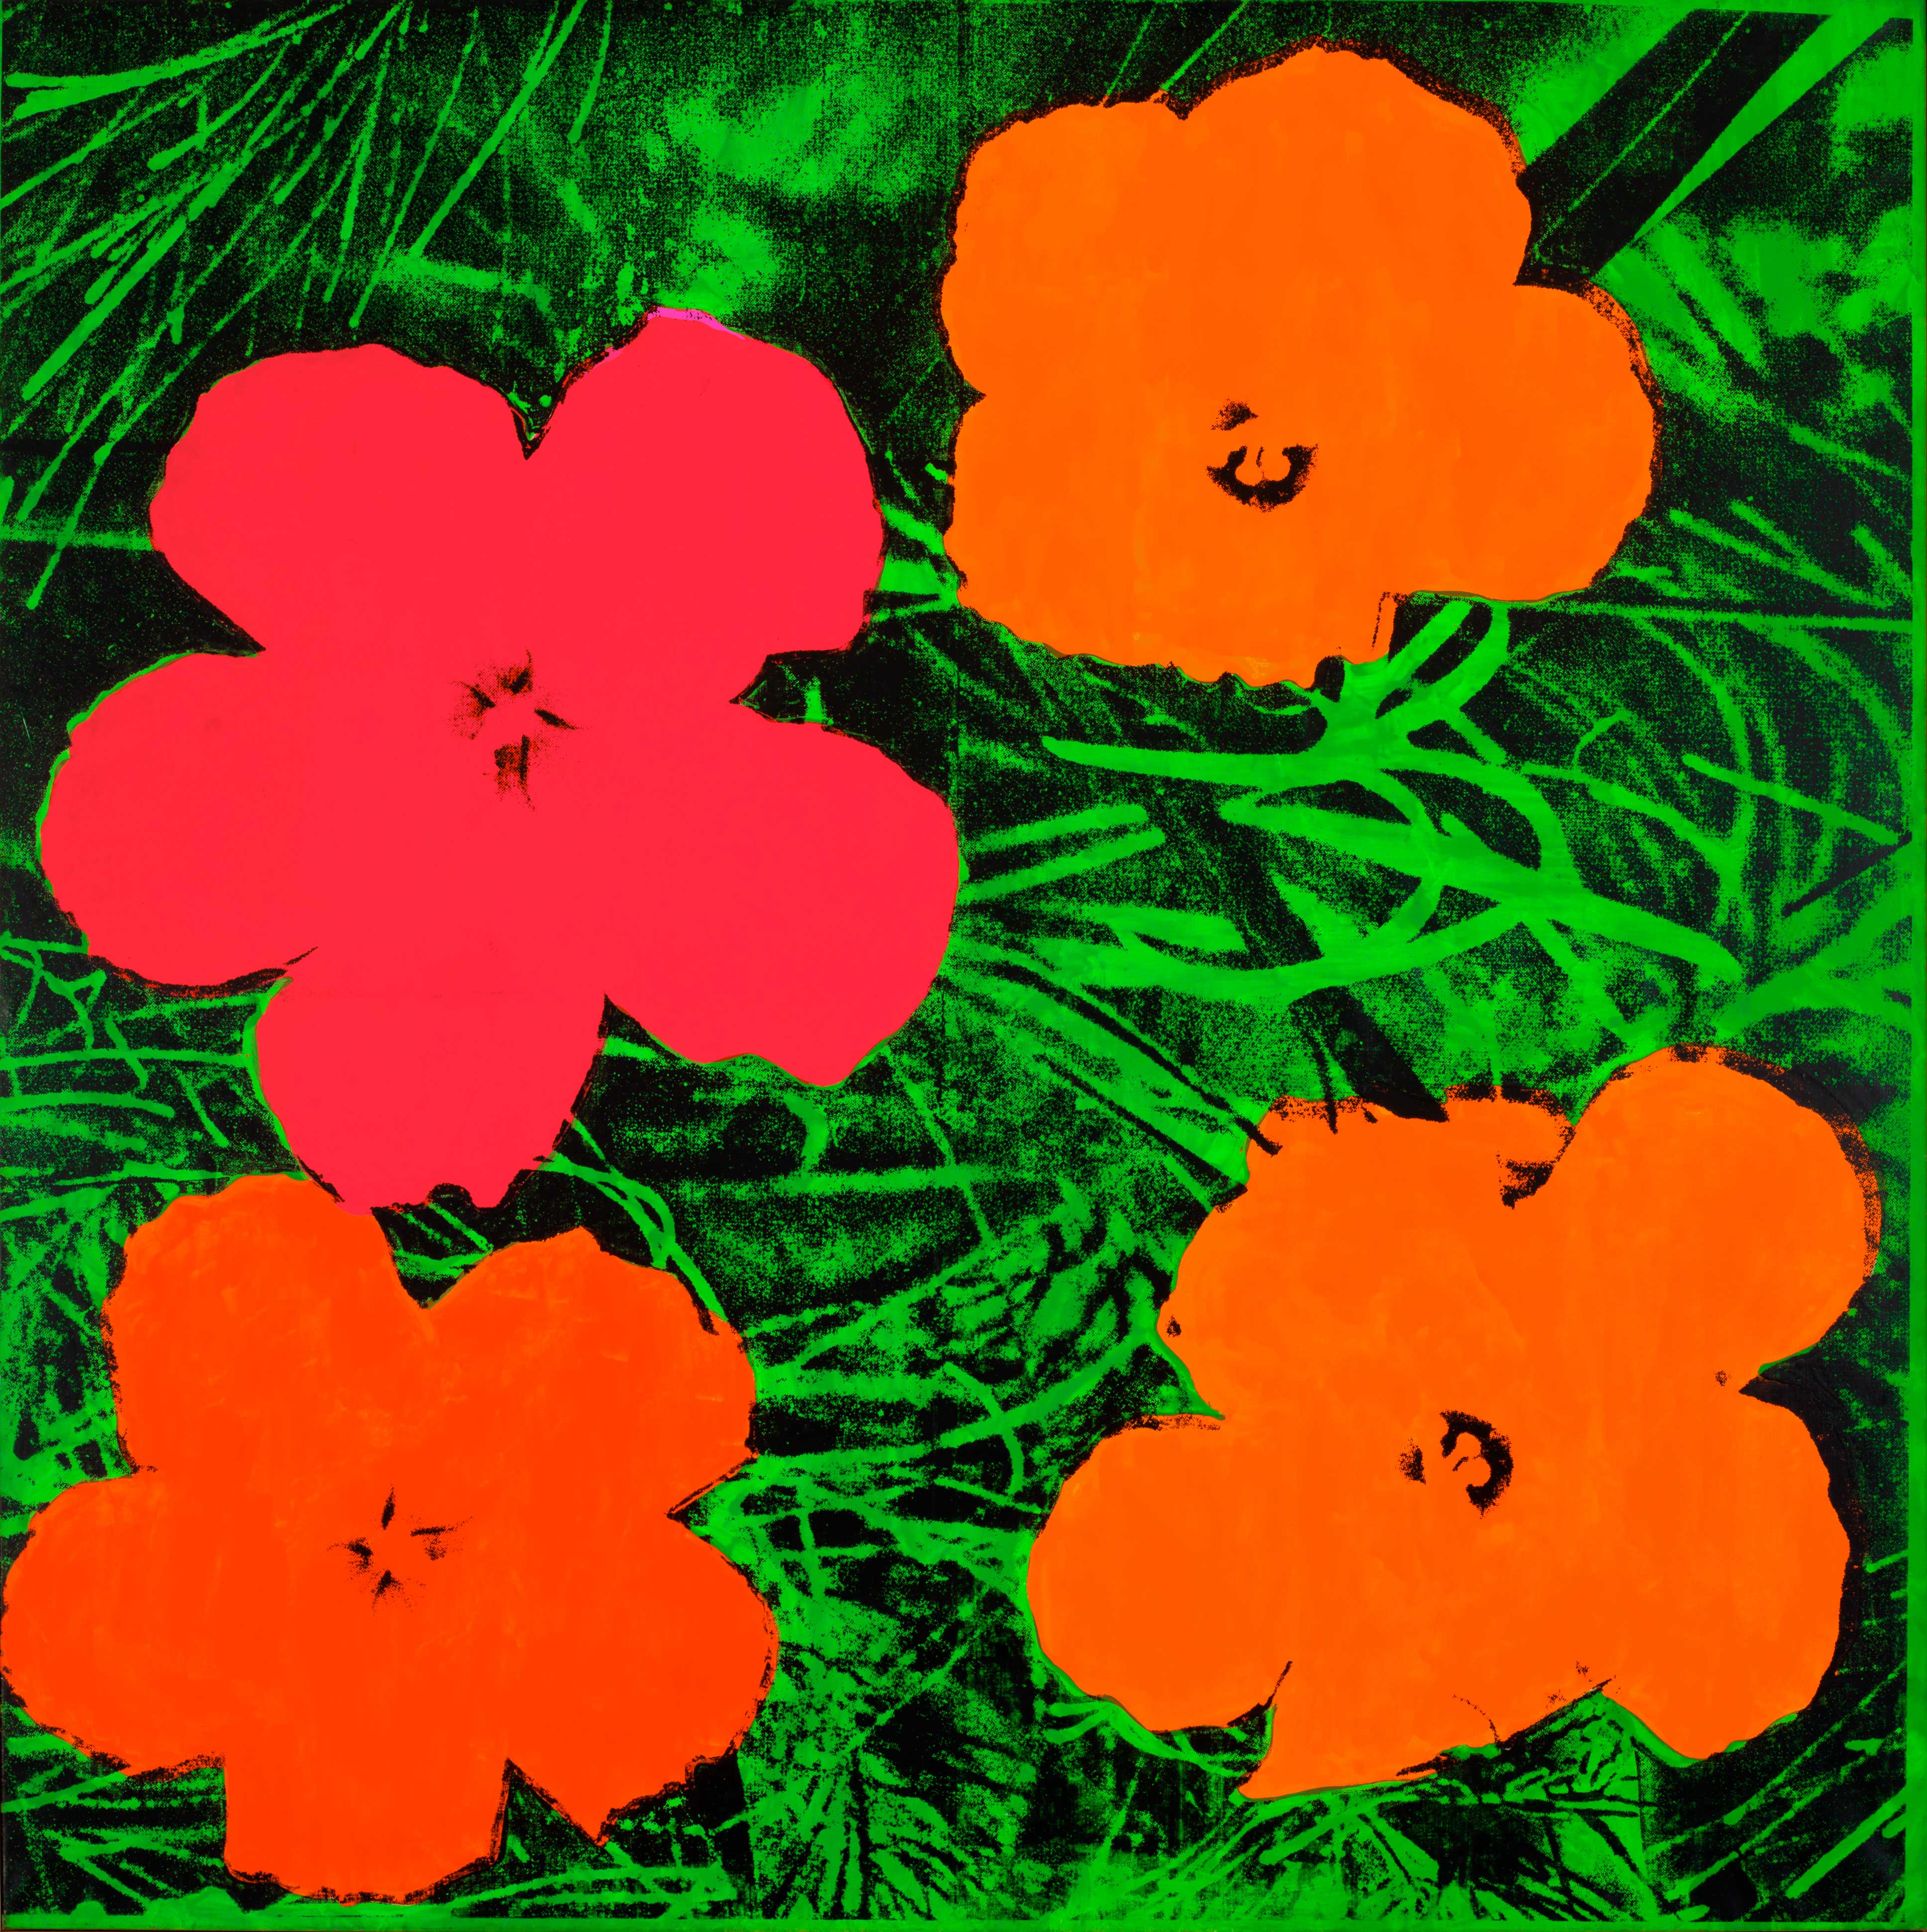 andy-warhol-1928-1987-flowers-1964-private-collection-2019-the